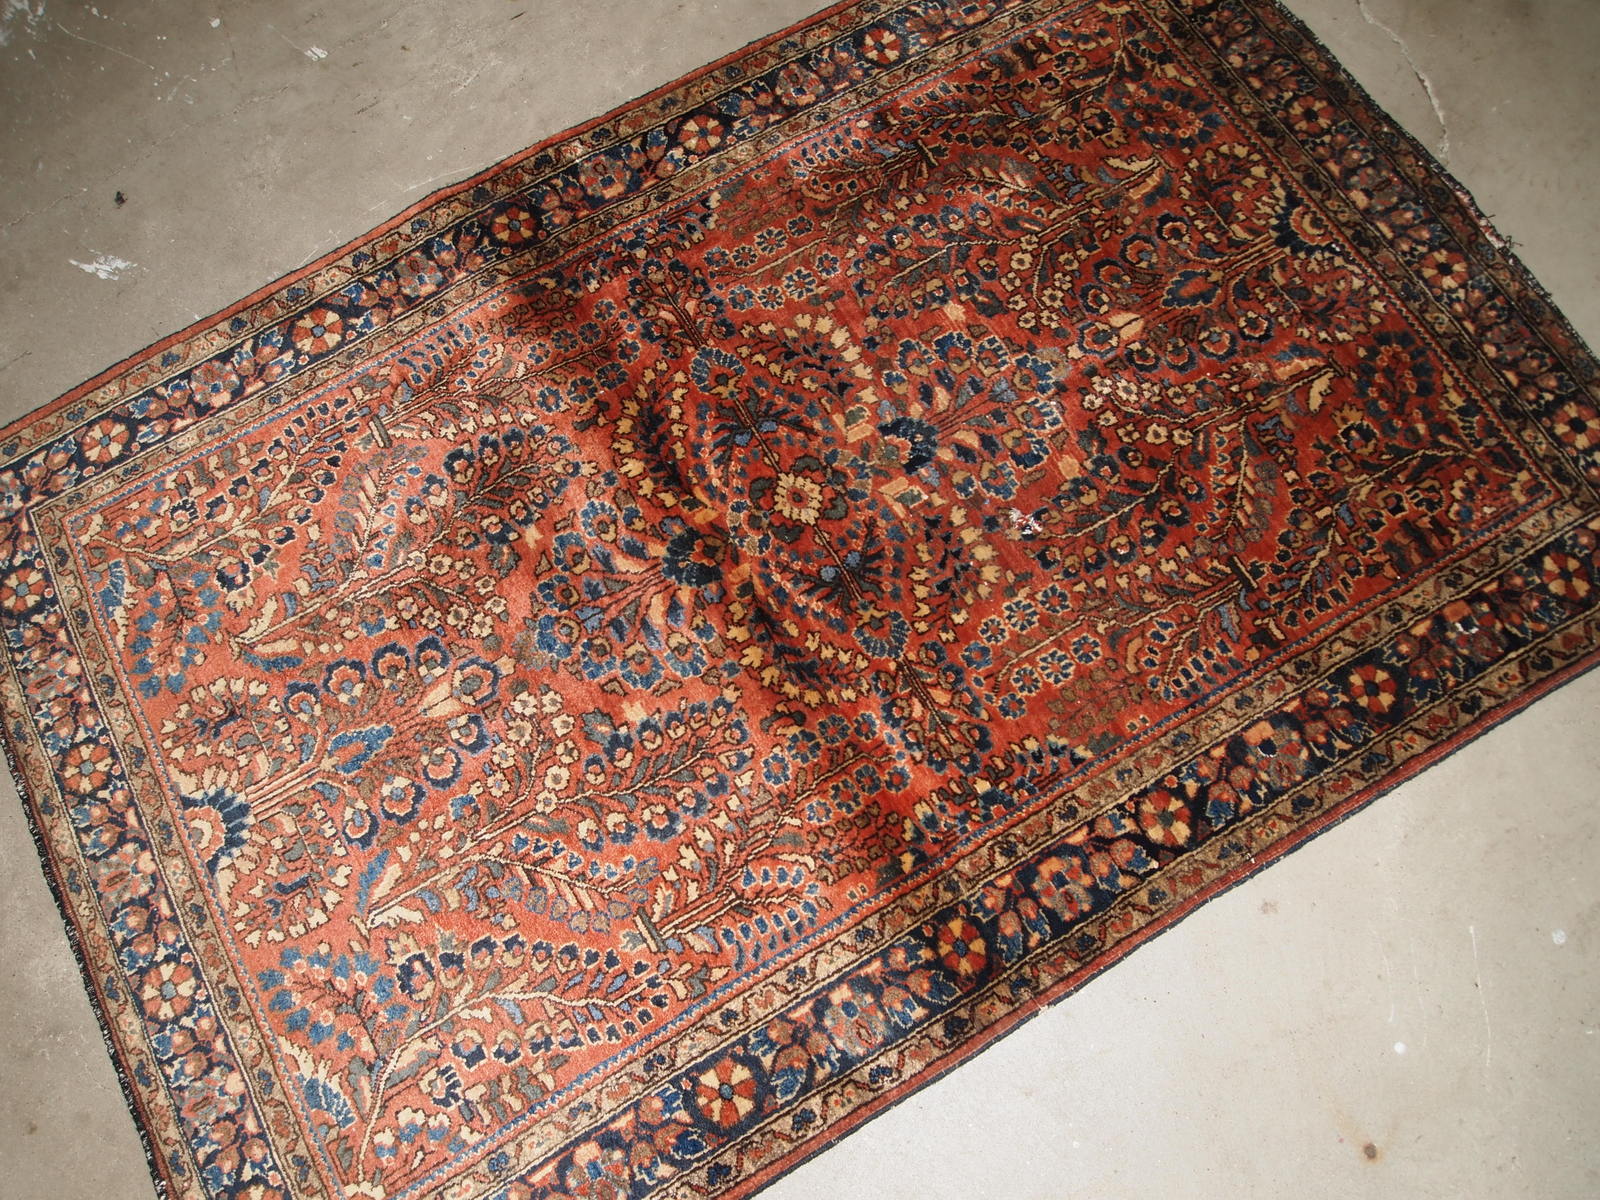 Handmade antique Persian Sarouk rug in original good condition. The rug is from the beginning of 20th century made in red wool.